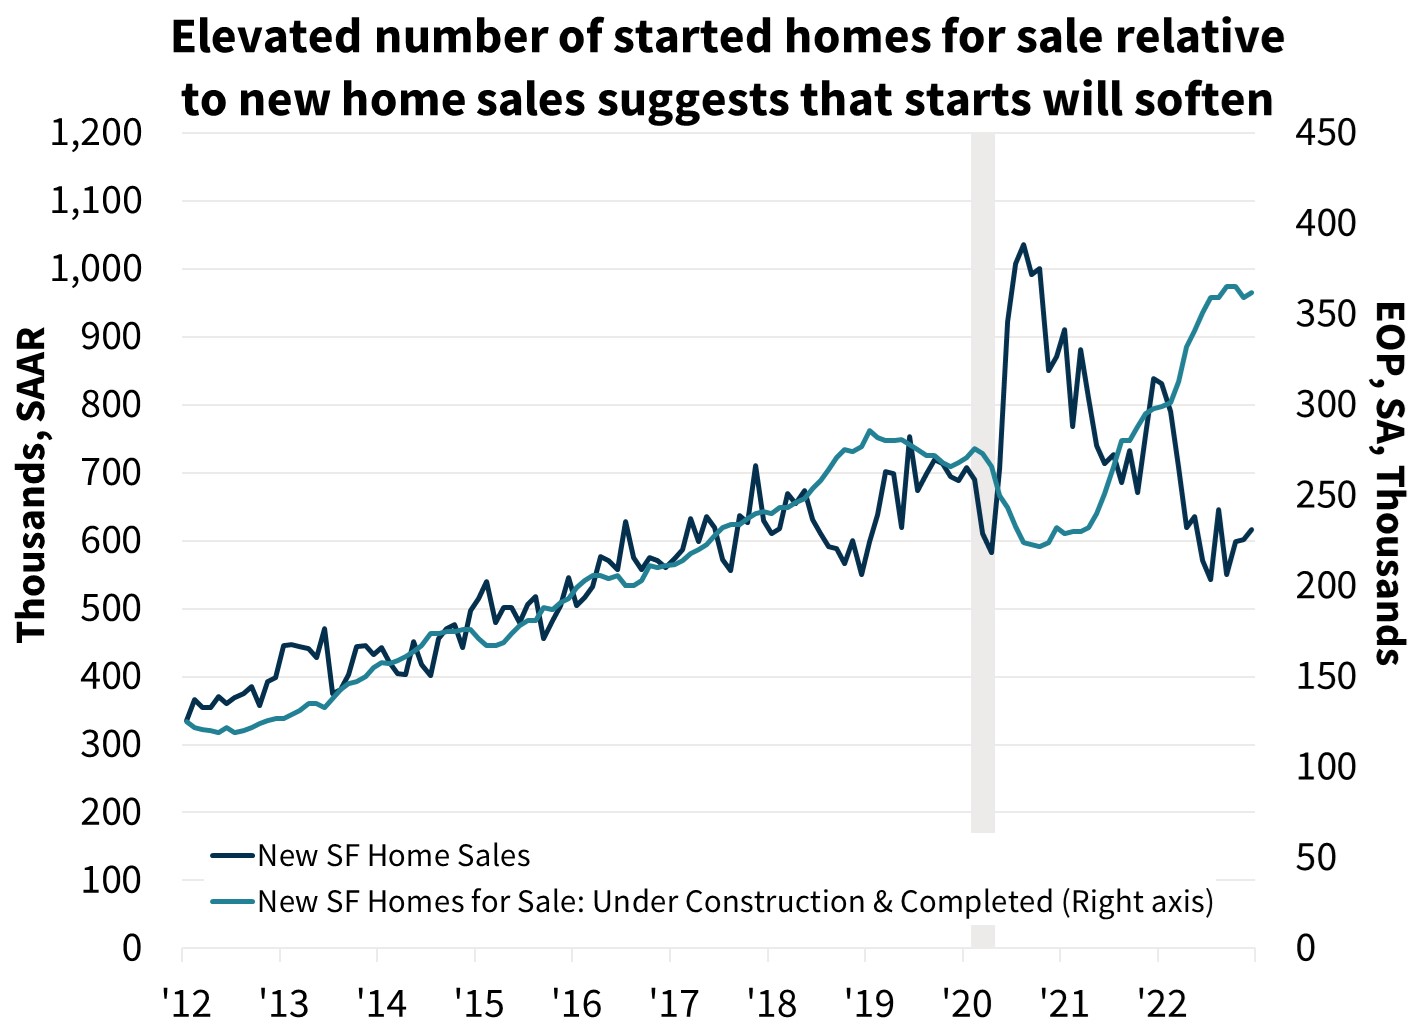  Elevated number of started homes for sale relative to new home sales suggests that starts will soften
